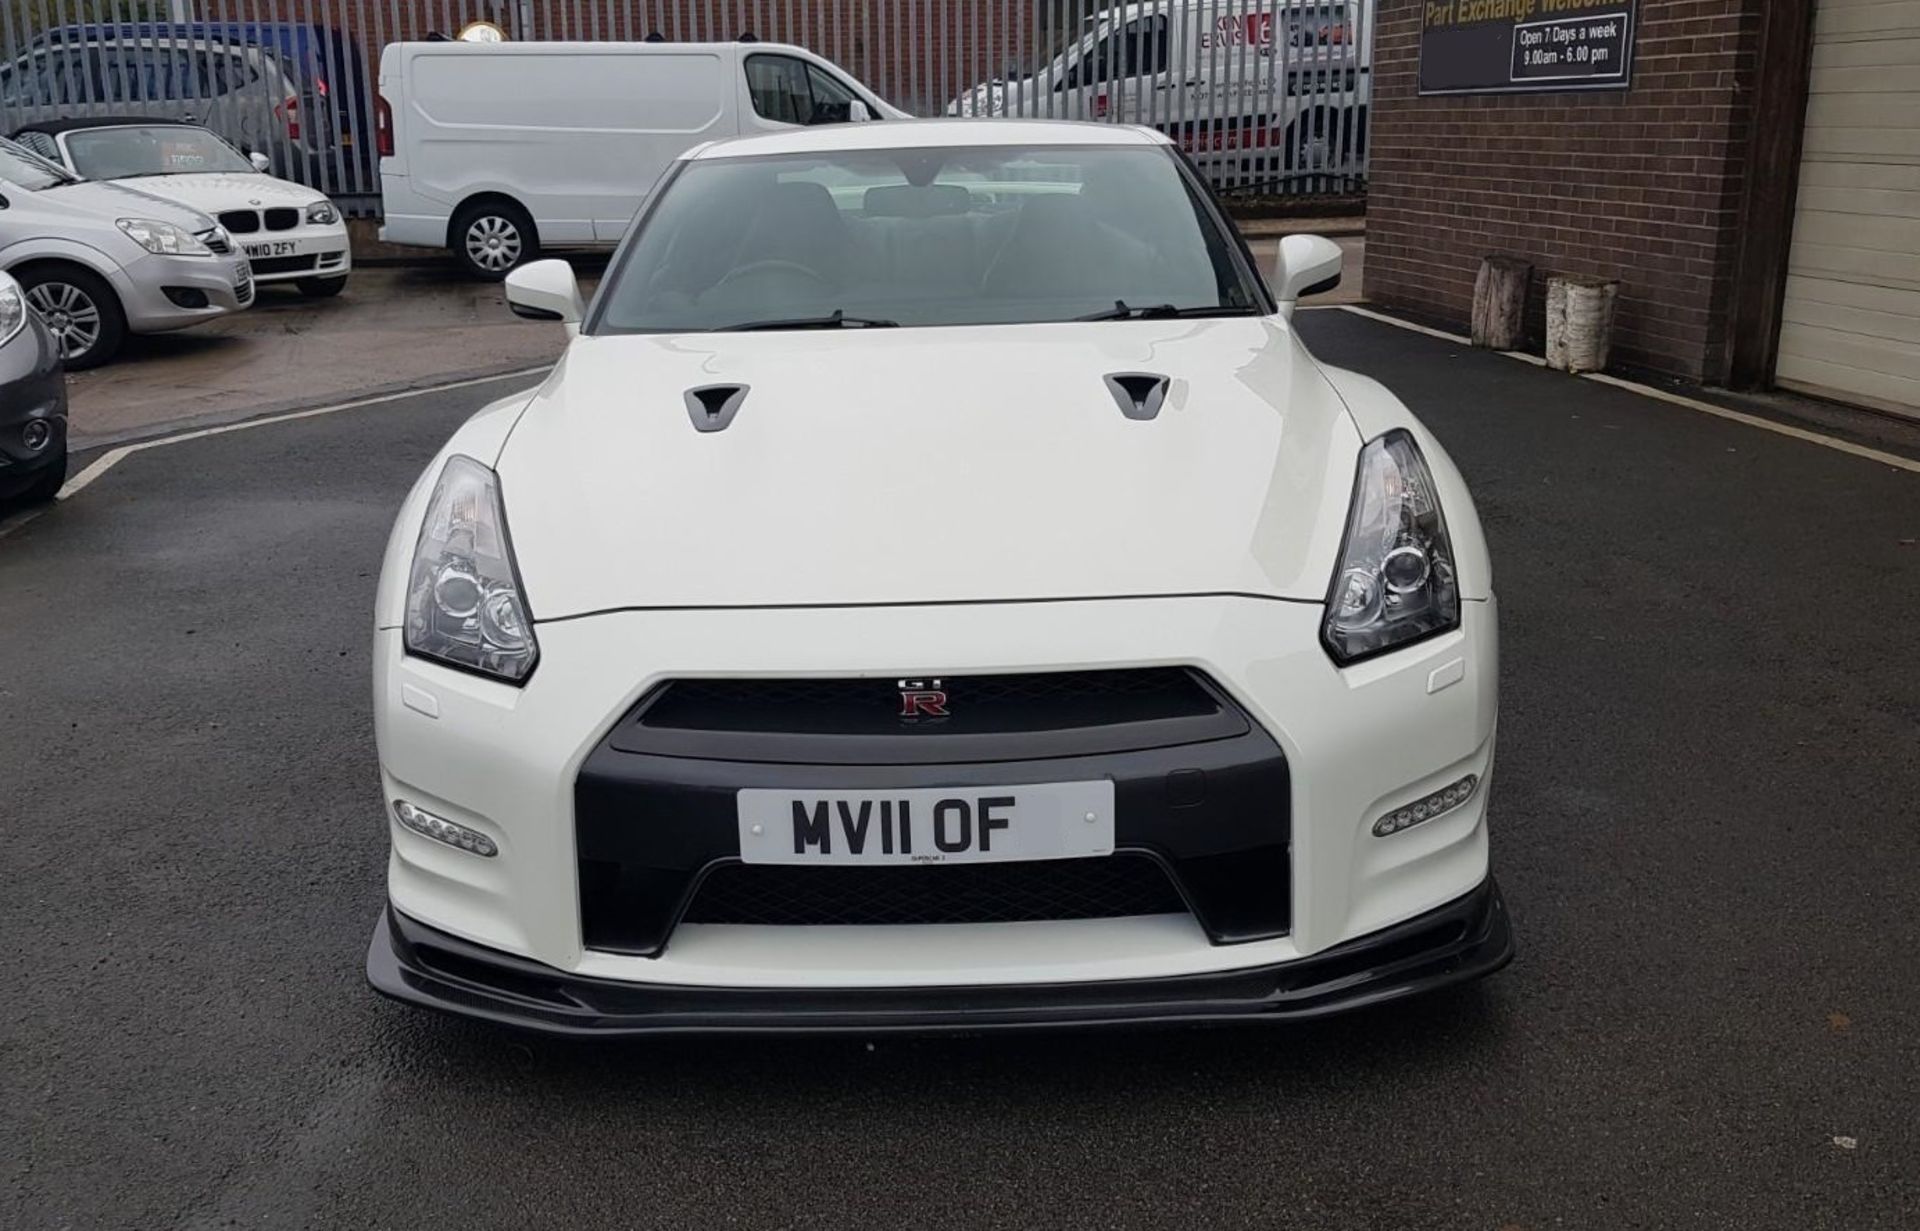 2011 NISSAN GT-R R35 750 stage 5 PREMIUM EDITION S-A 1 OWNER FROM NEW 19.5K MILES WARRANTED! no vat - Image 2 of 7